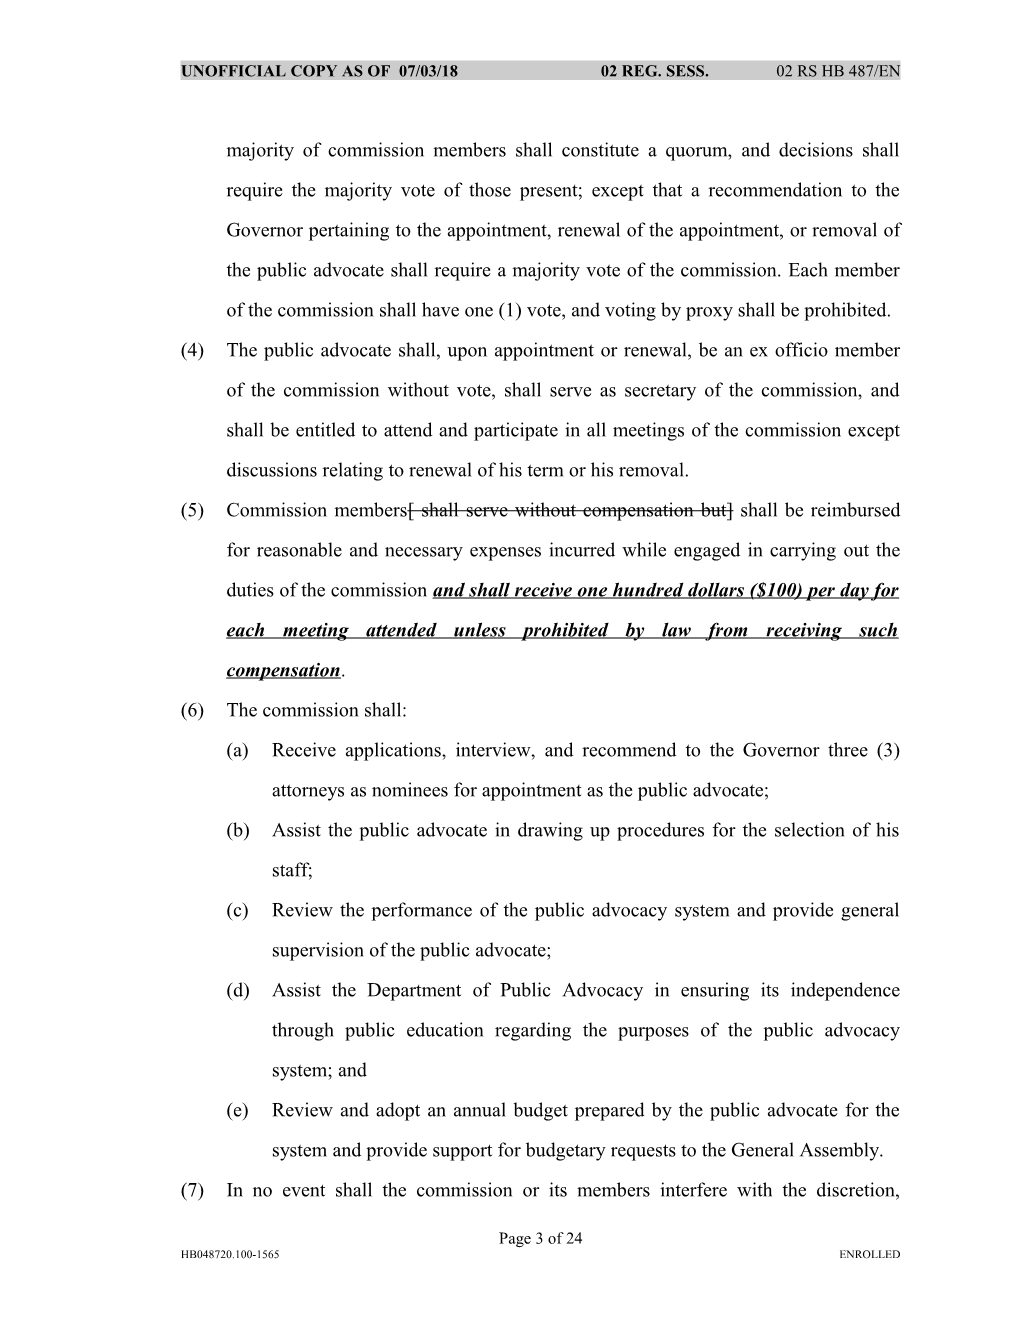 AN ACT Relating to the Department of Public Advocacy